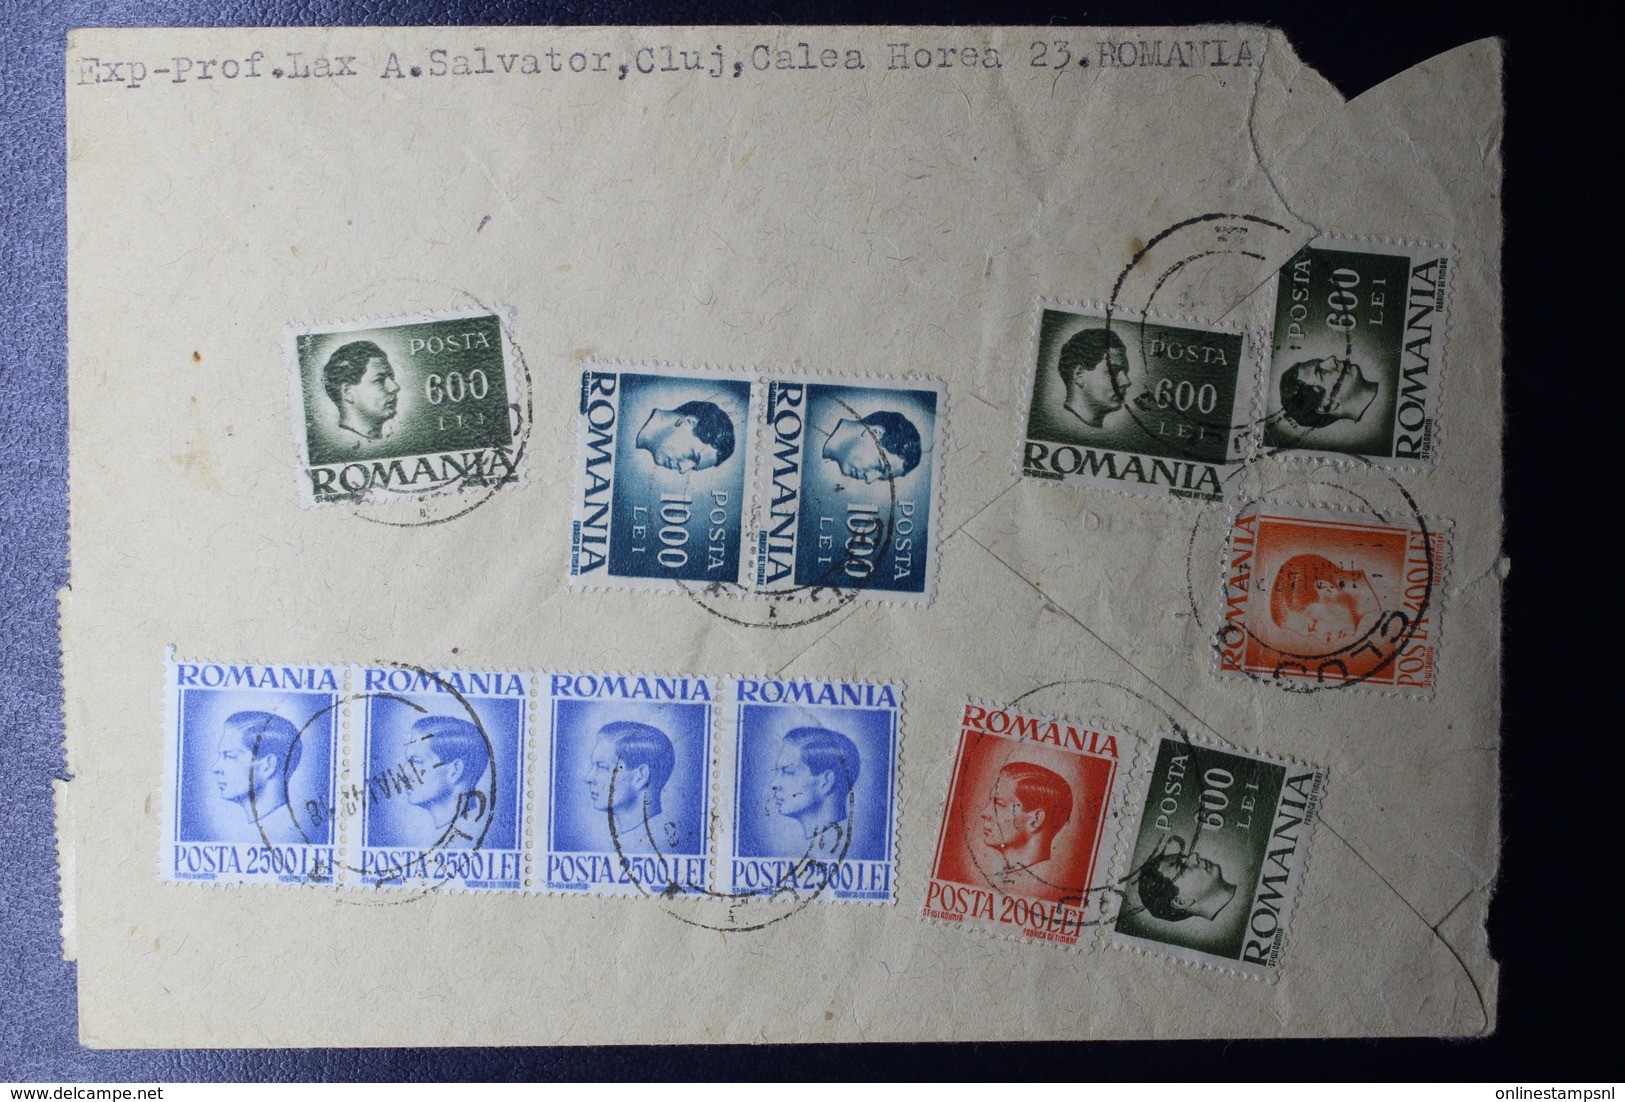 Romania Airmail Cover Inflation Period, Mixed Stamps From Cluj To Geneva Switserland 1948  31.000 L Rate Cover - Covers & Documents